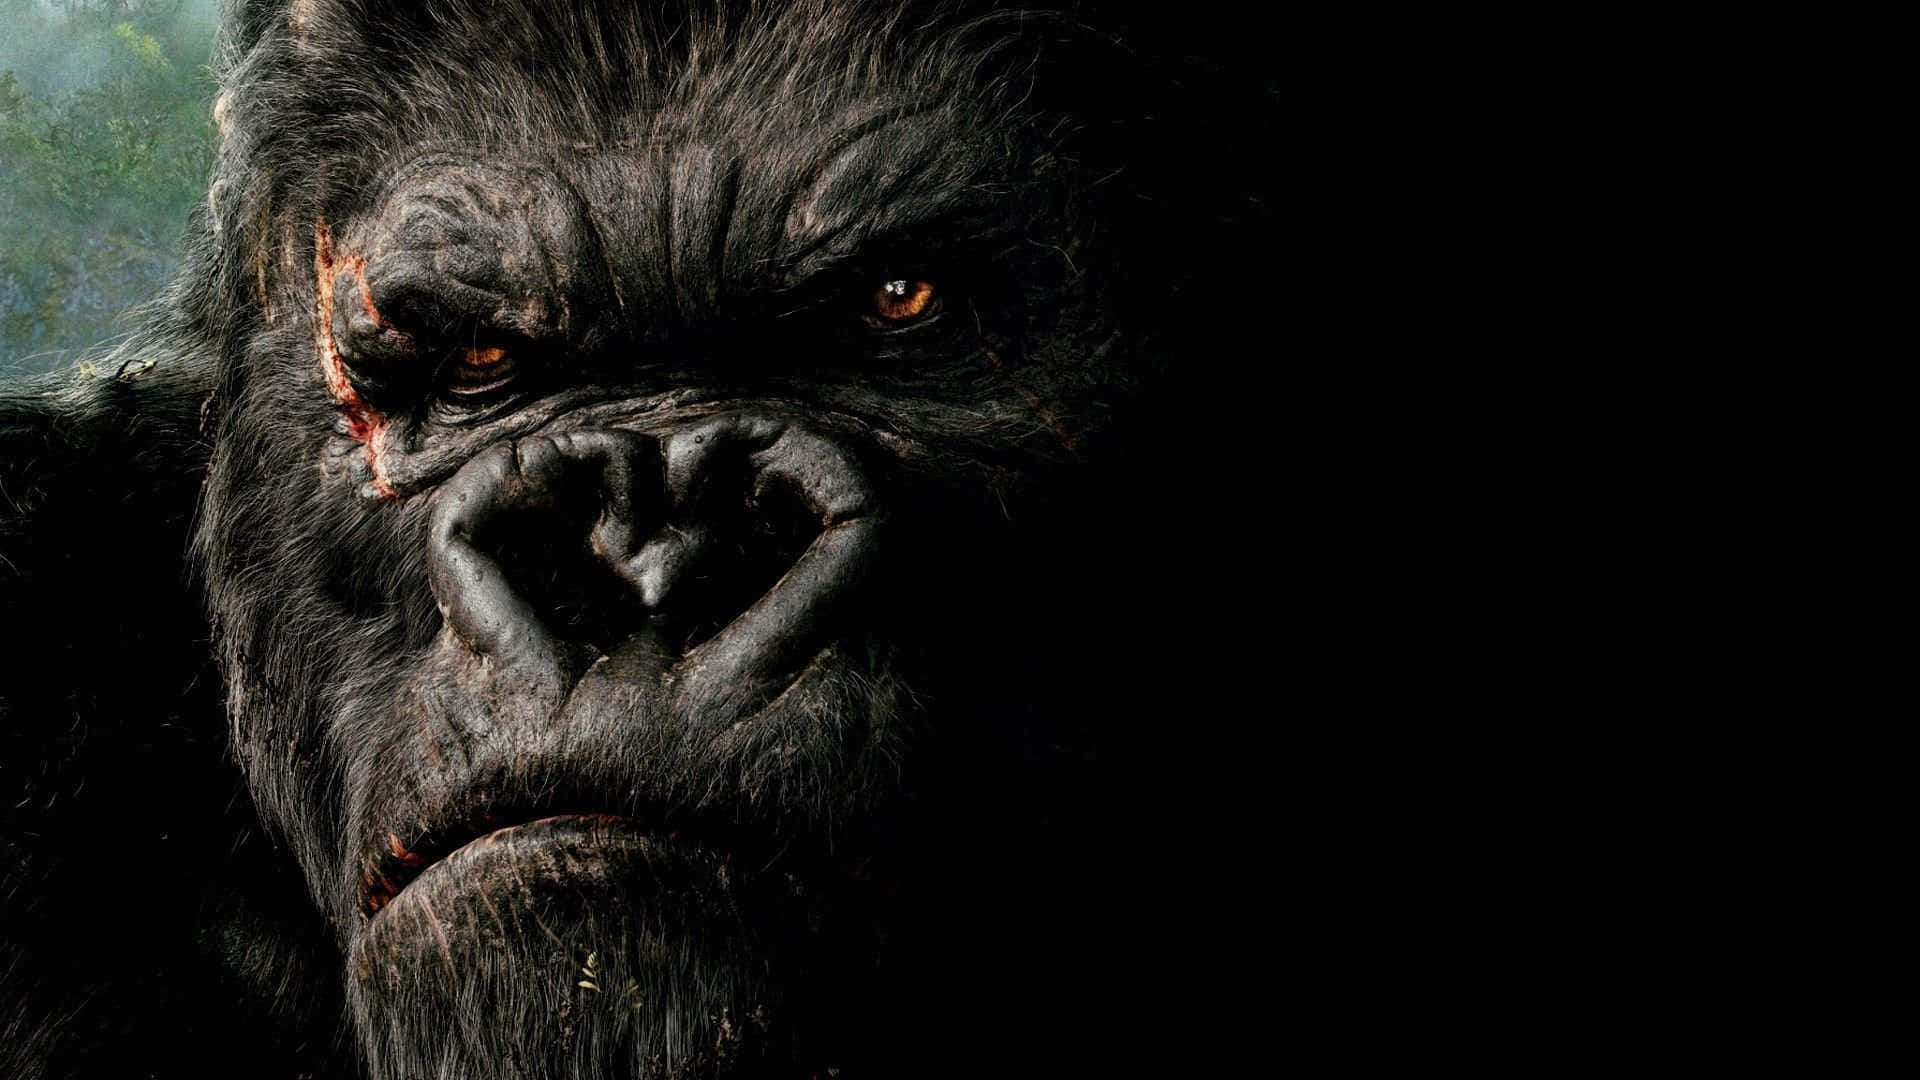 An iconic image of King Kong, the fictional giant ape character